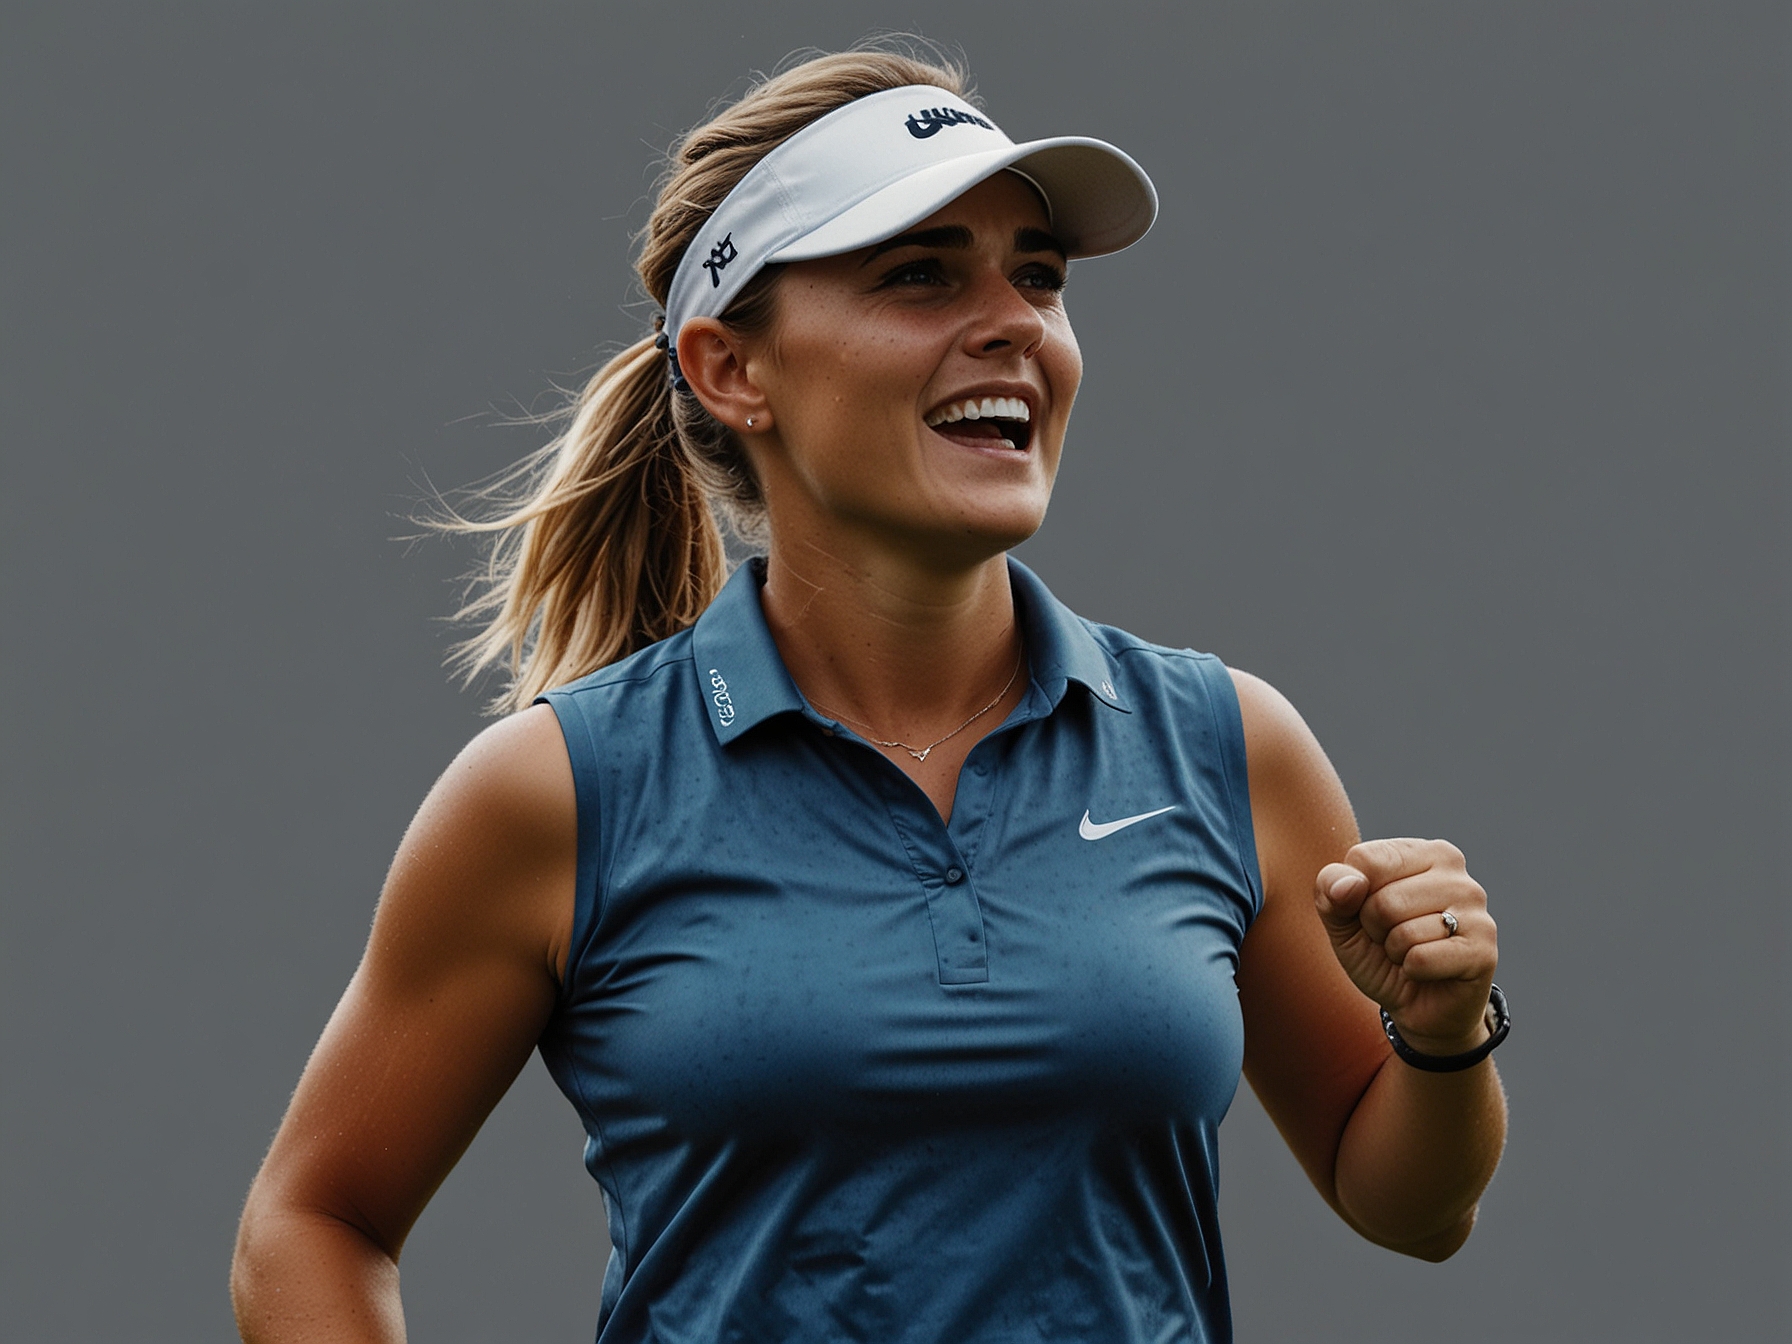 Lexi Thompson celebrates after making a crucial putt, displaying her joy and determination while leading the KPMG Women's PGA with an exceptional round.